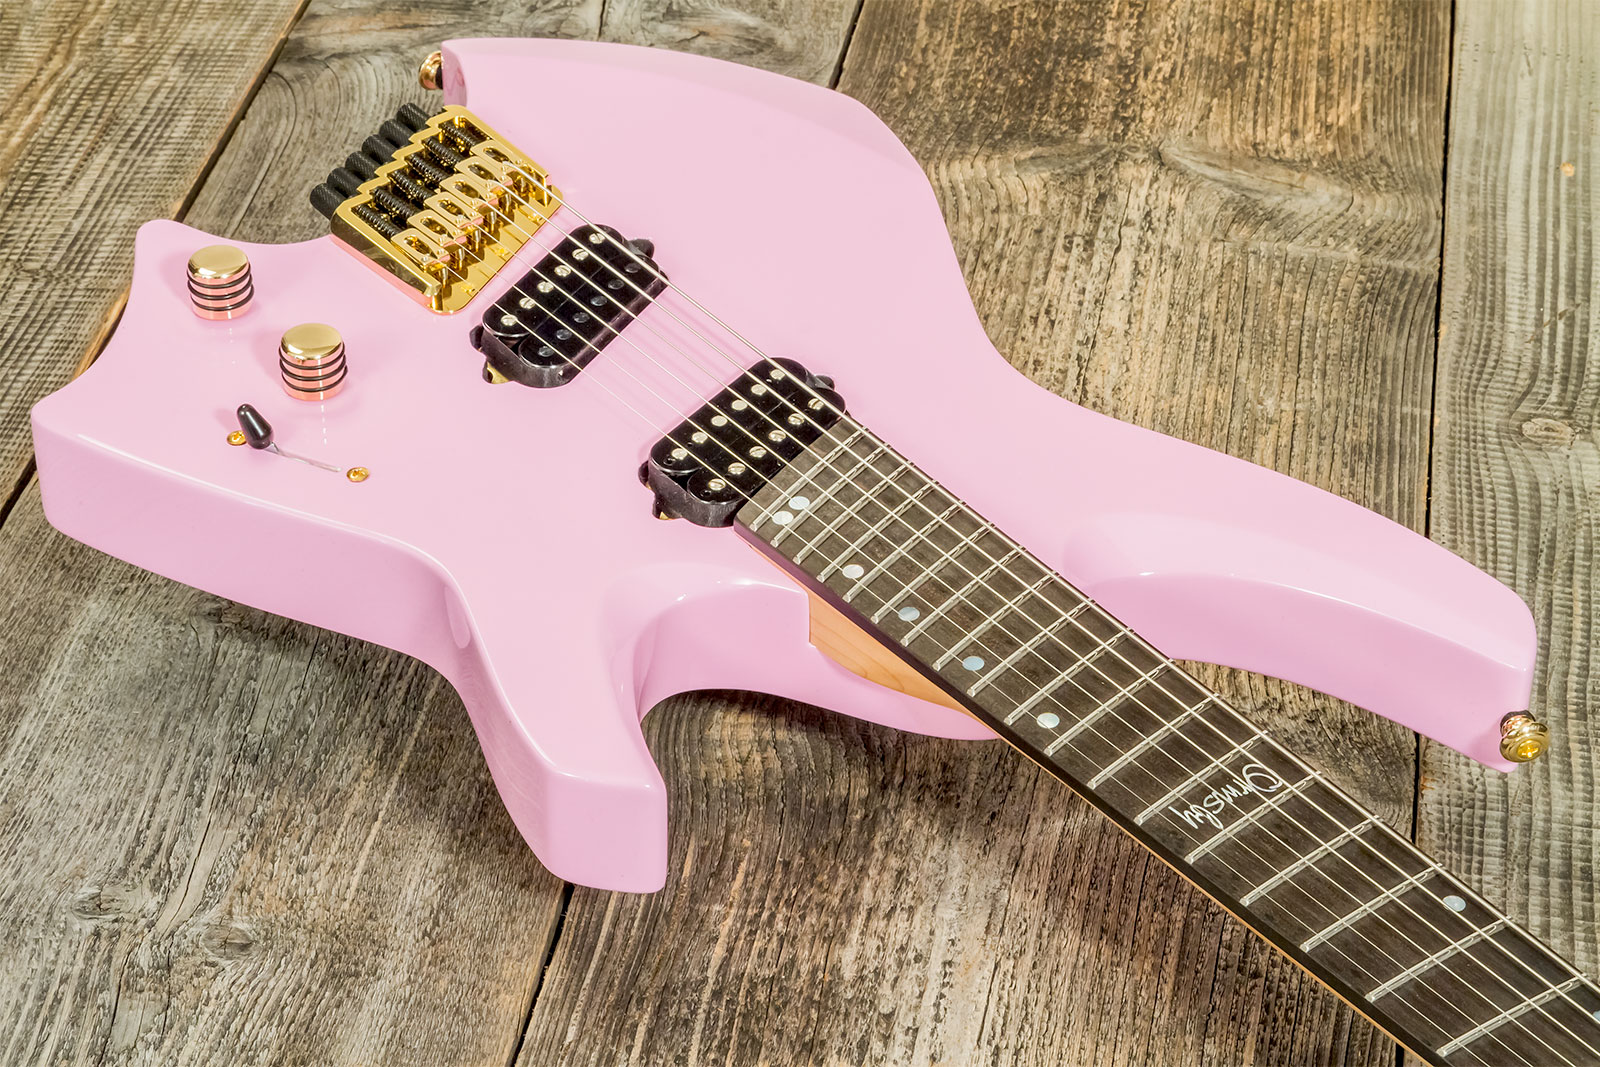 Ormsby Goliath Headless Gtr Run 14c Multiscale 2h Ht Eb - Shell Pink - Guitare Électrique Multi-scale - Variation 1